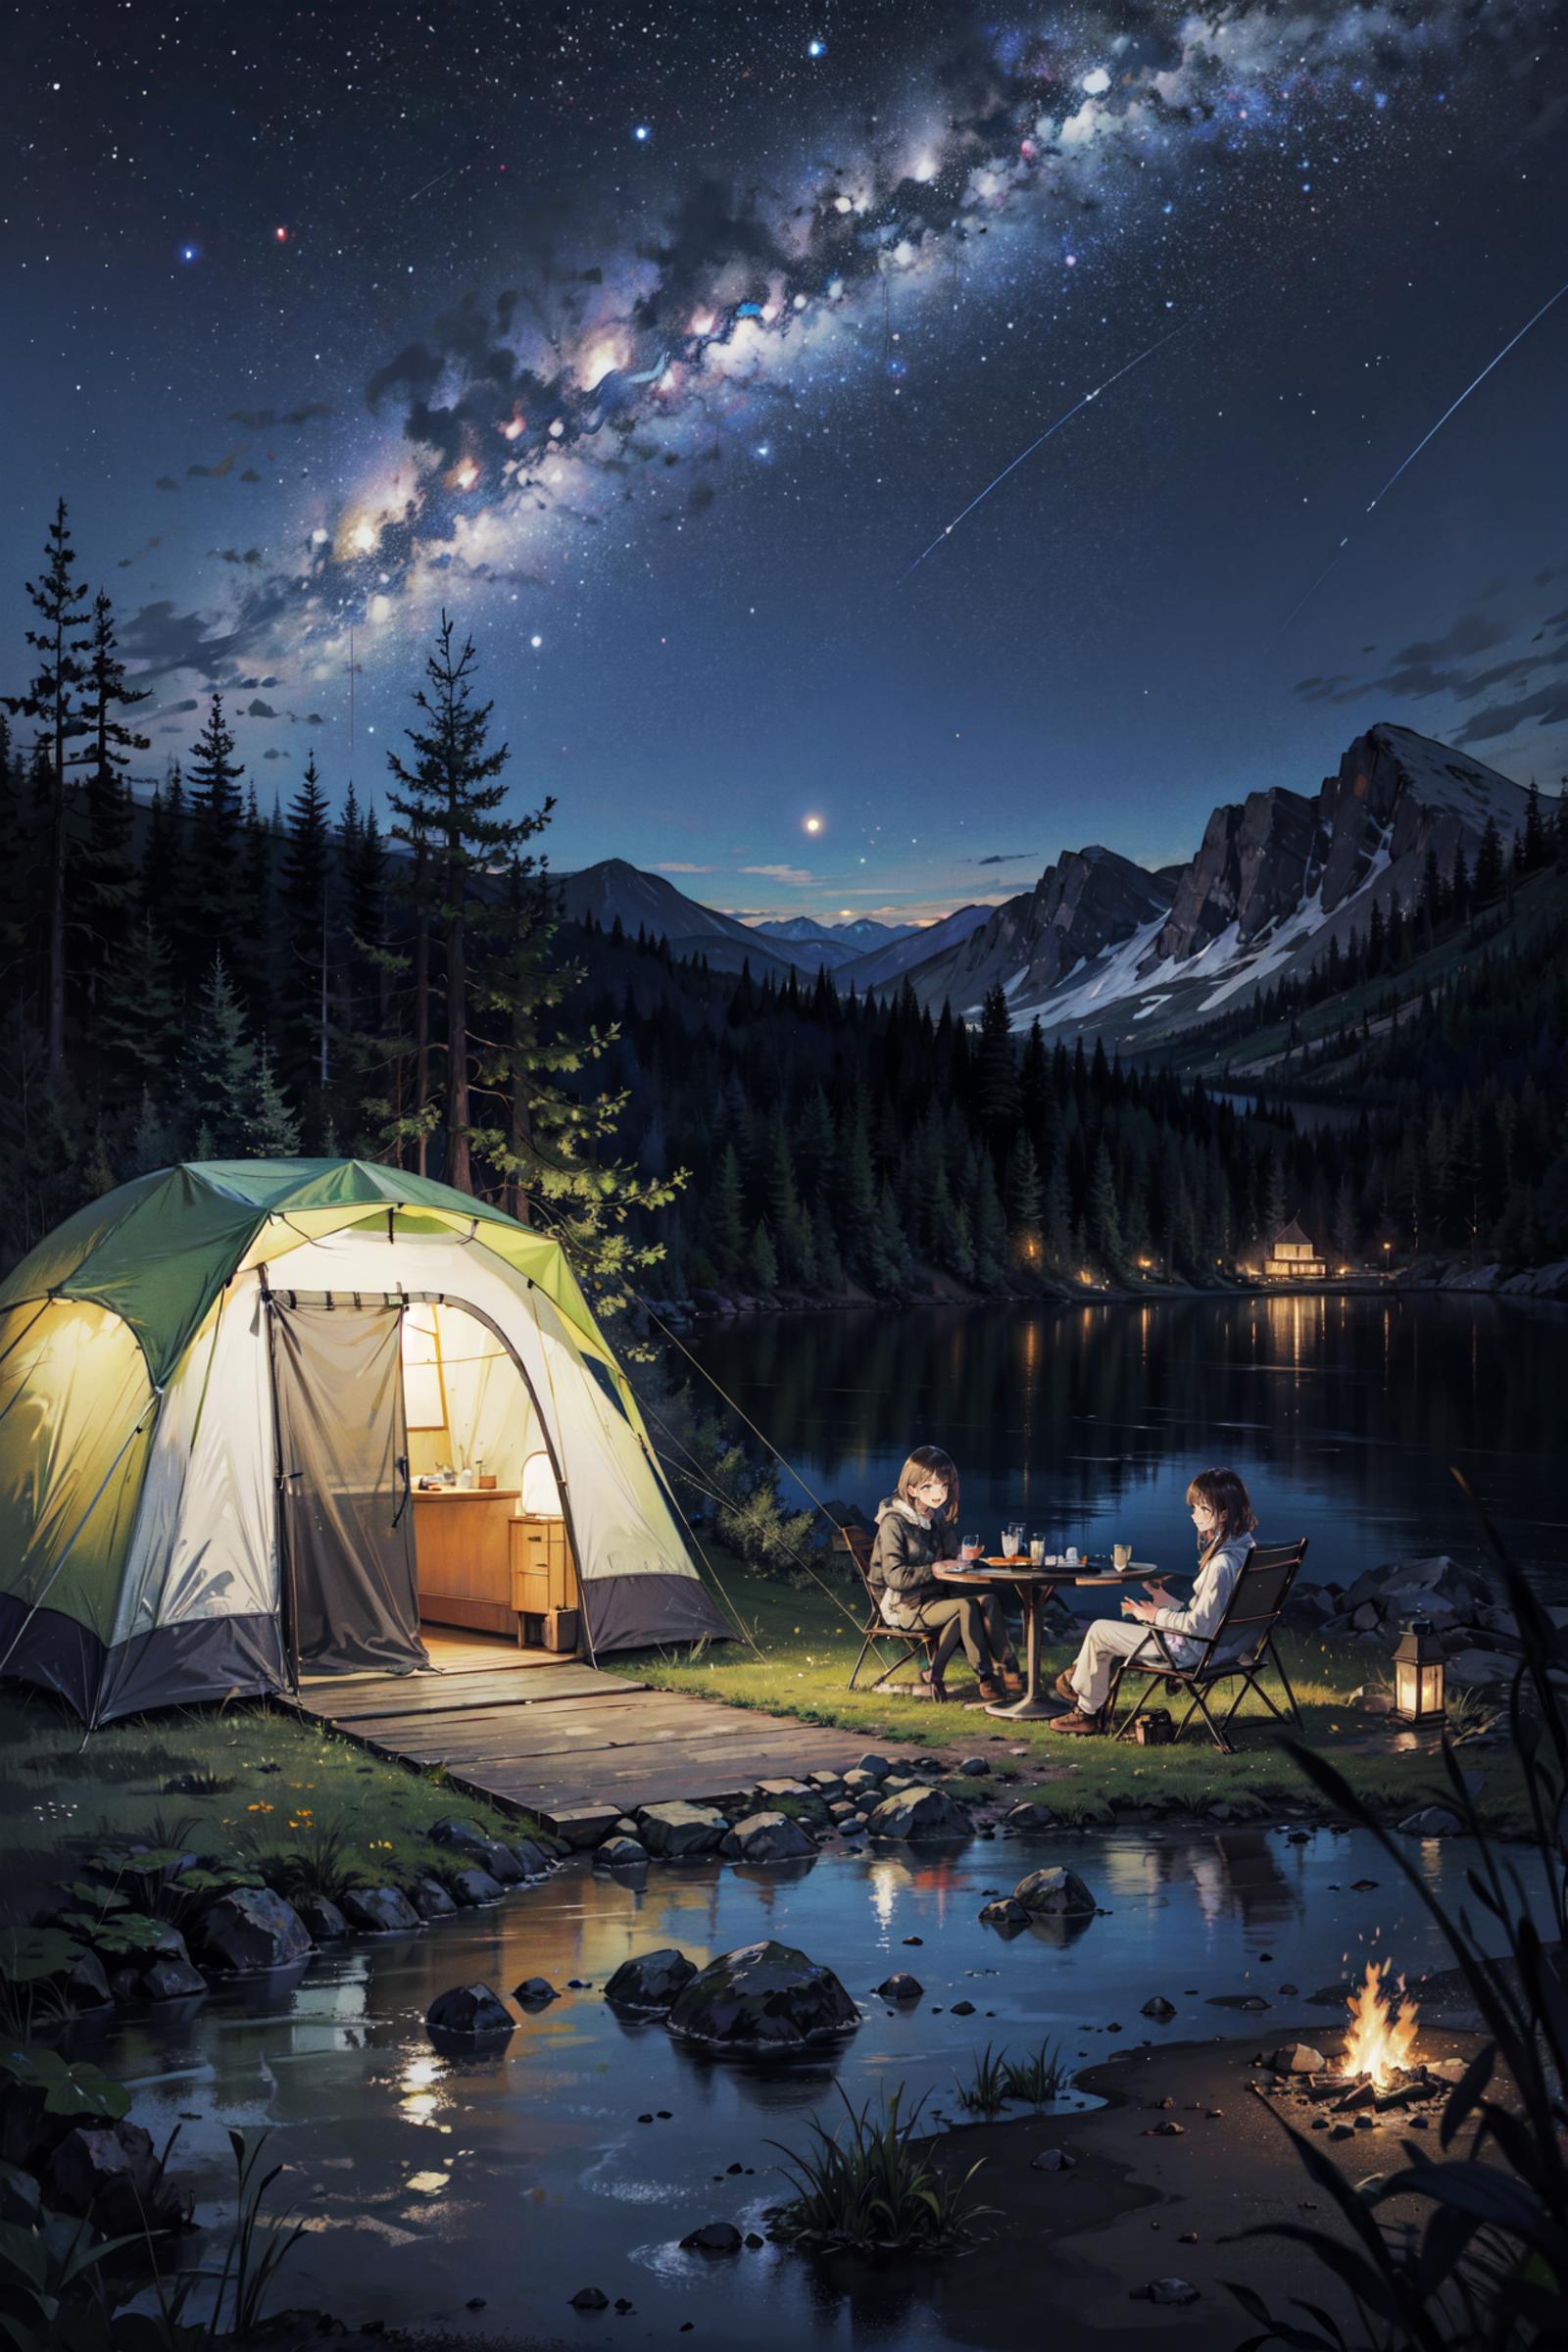 A camping scene with two people sitting by a lake under a starry sky.